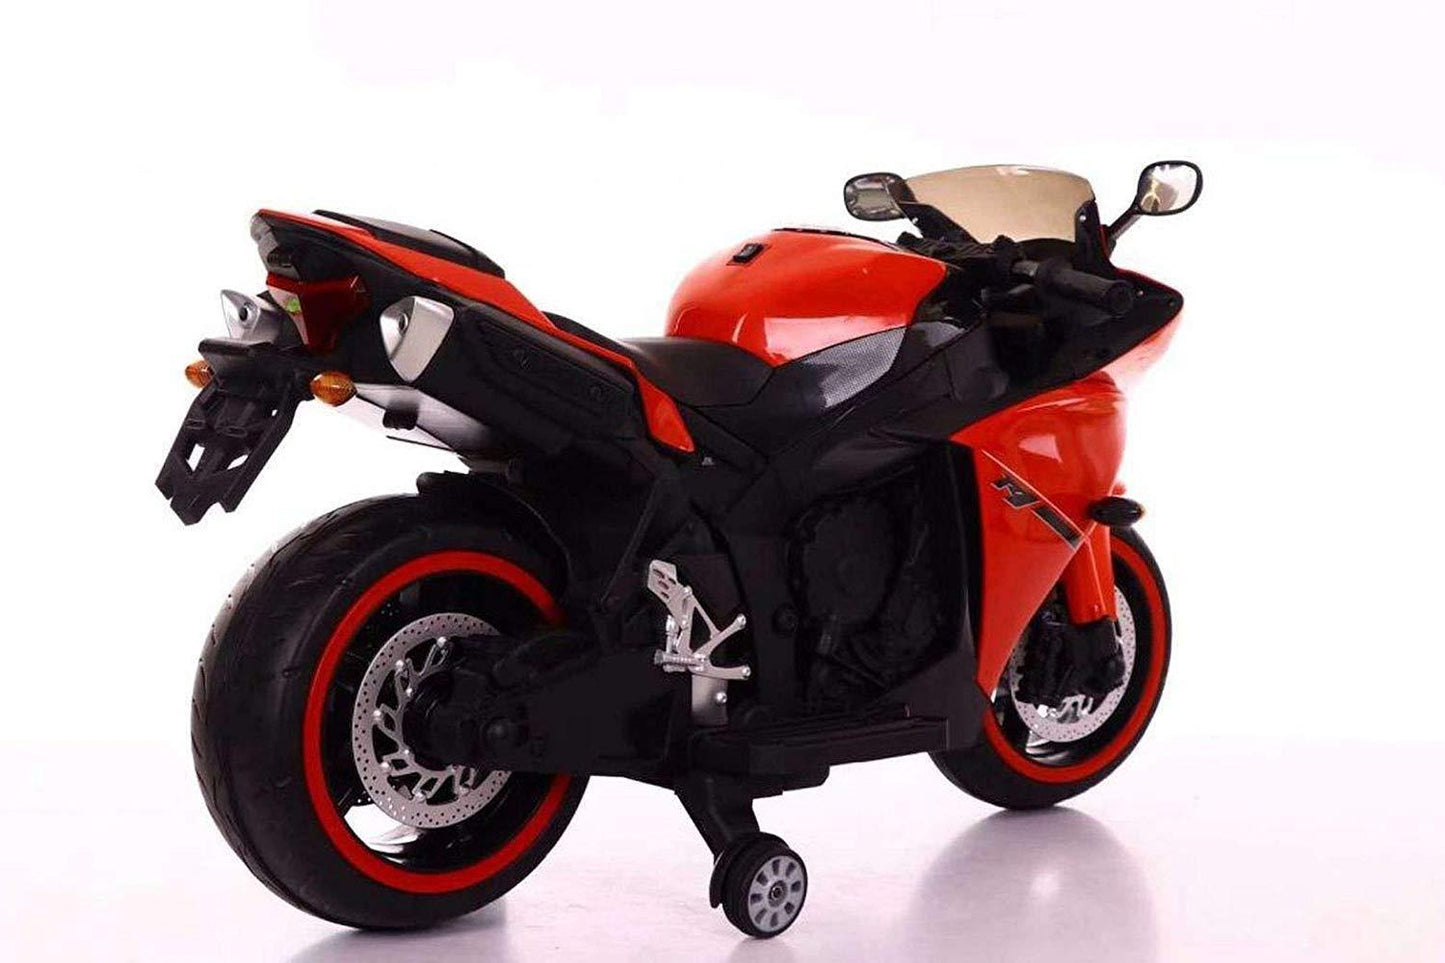 PATOYS | R1 Painted Sports Ride on Bike for Kids with 12V Battery Operated Motorcycle upto 7 years kids - PATOYS